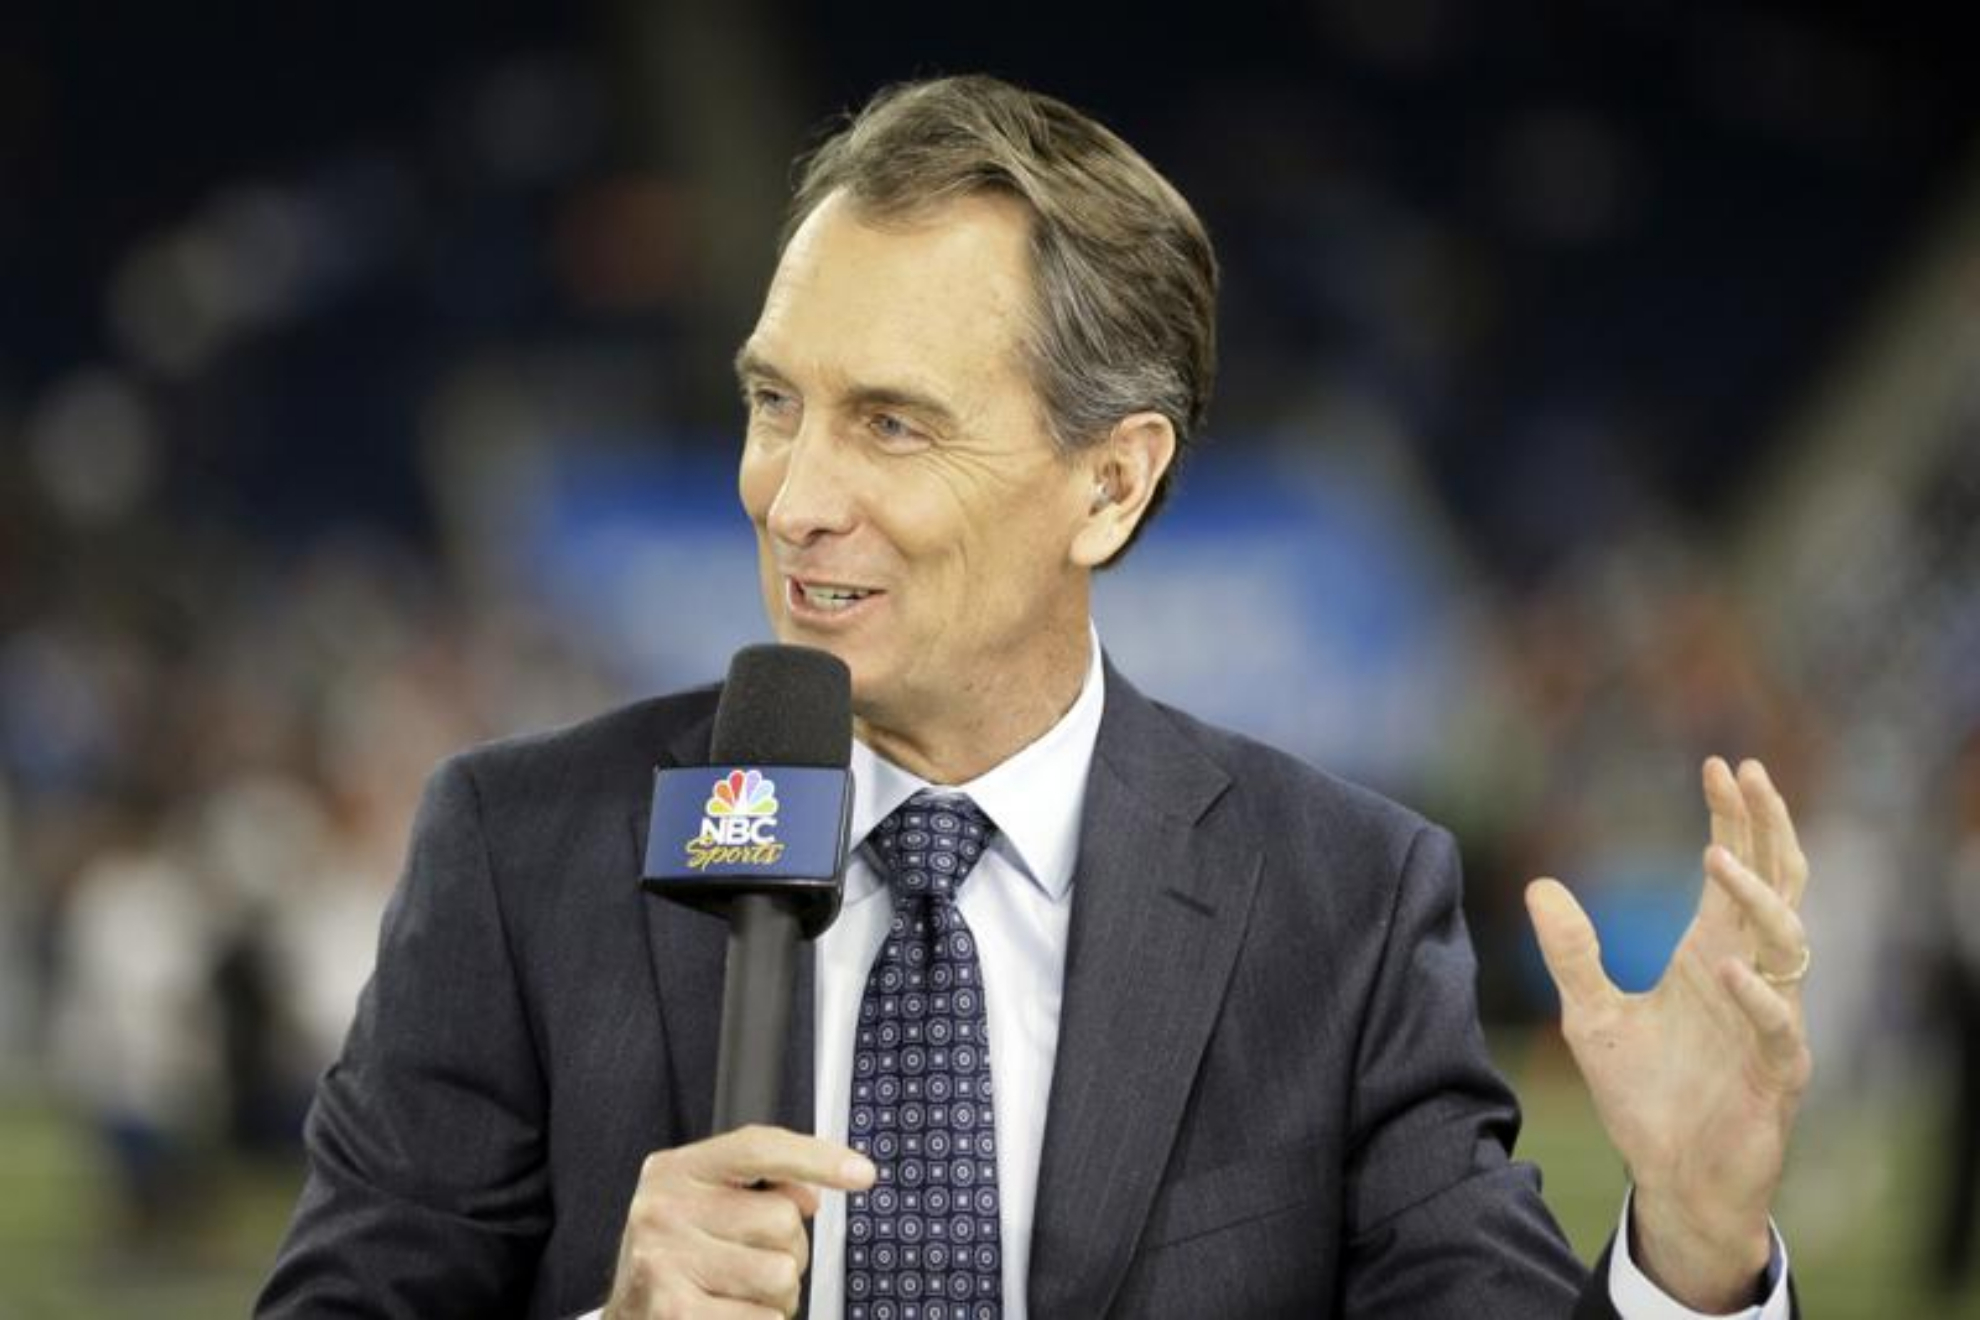 Cris Collinsworth comment on Sunday Night Football caught Twitter